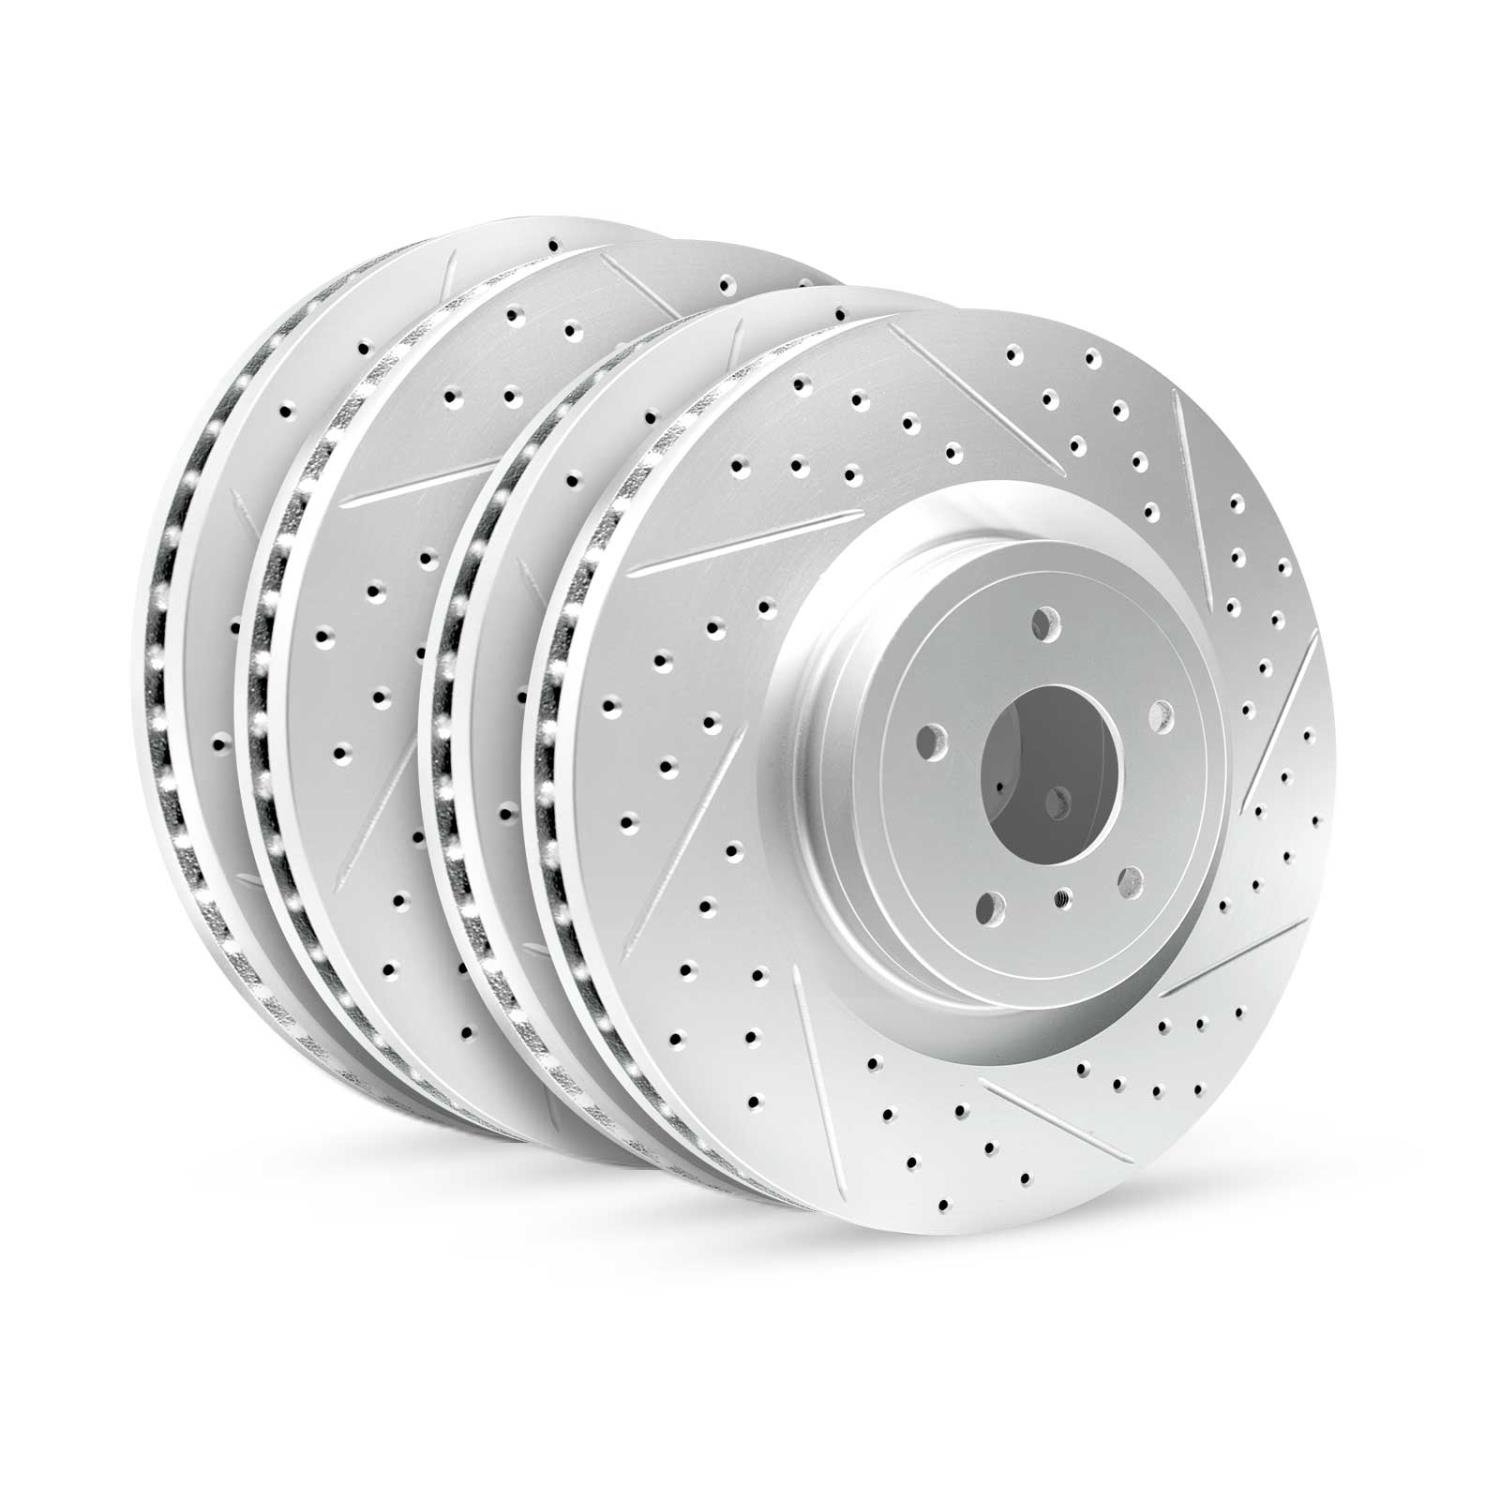 GEO-Carbon Drilled/Slotted Rotors, 2007-2008 BMW, Position: